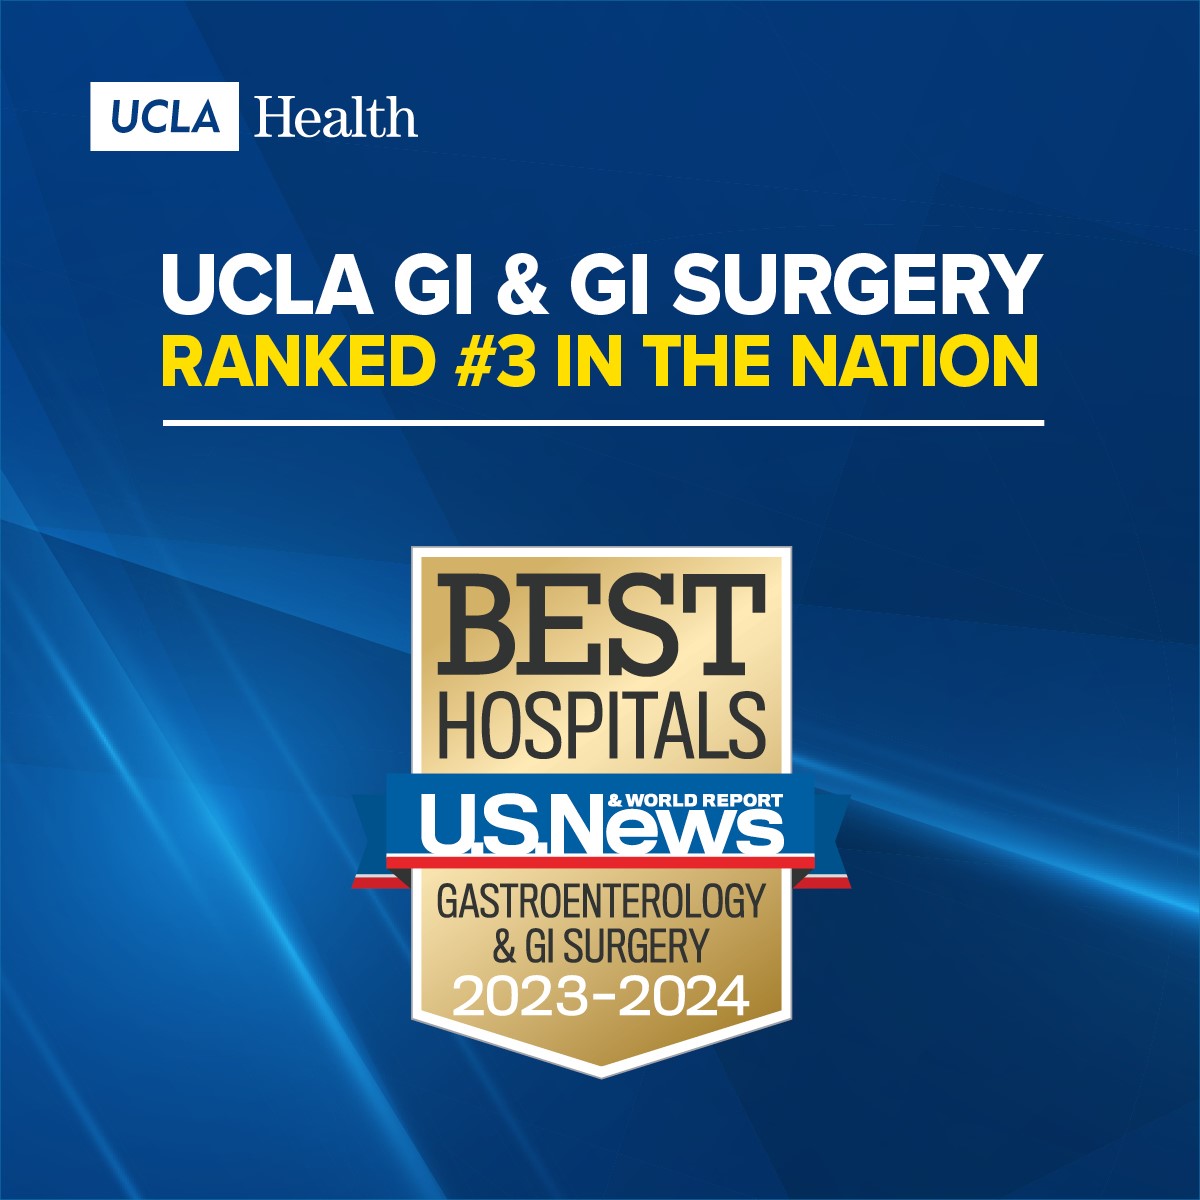 🙌#UCLAGI & GI surgery ranked #3 in @USNews Best Hospitals rankings! This also makes us the top ranked GI & GI surgery hospital for a public university in the country. We celebrate the exemplary & personalized care provided by our🩺, allied healthcare professionals & staff.